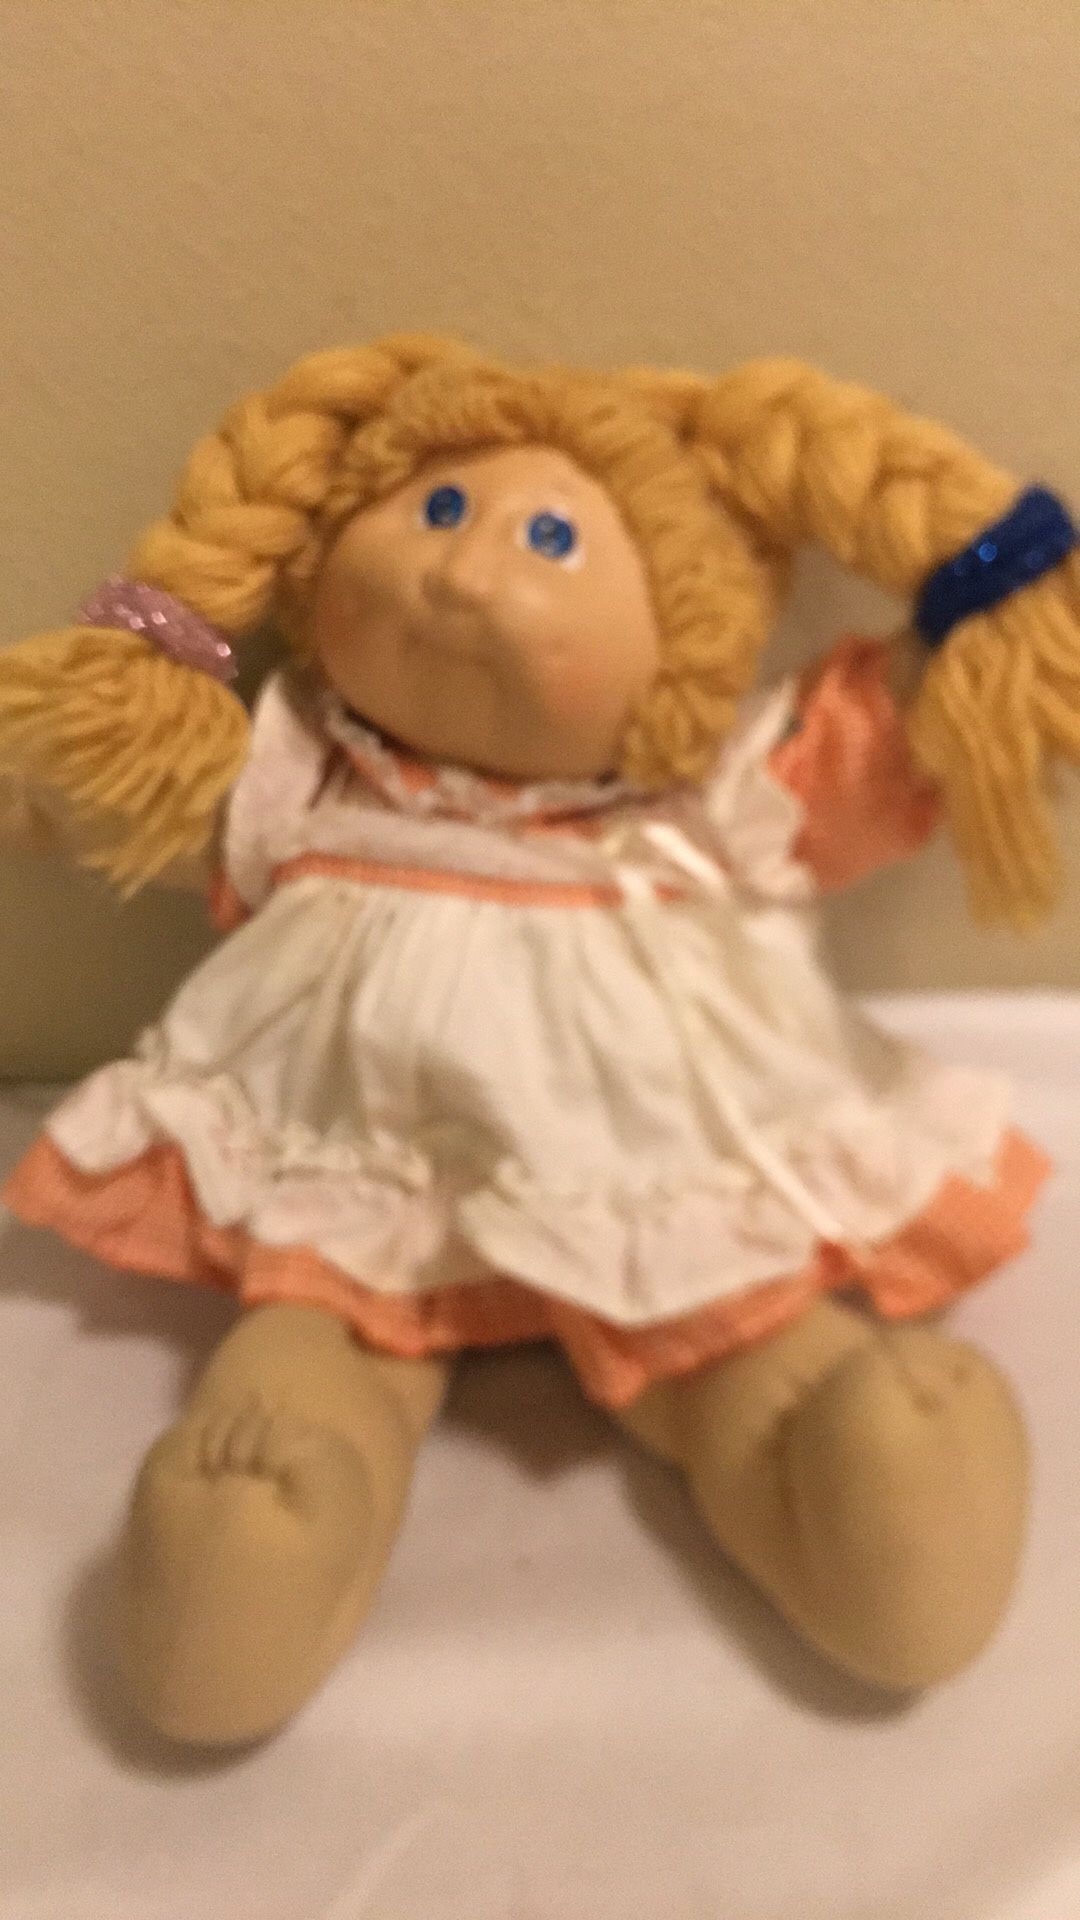 Vintage Cabbage Patch Kids Doll (#2)1985 Popcorn & Apron Dress, Girl Blue eyes Curly Blonde Papers(Birth Certificate) & Adoption Papers. In great cond